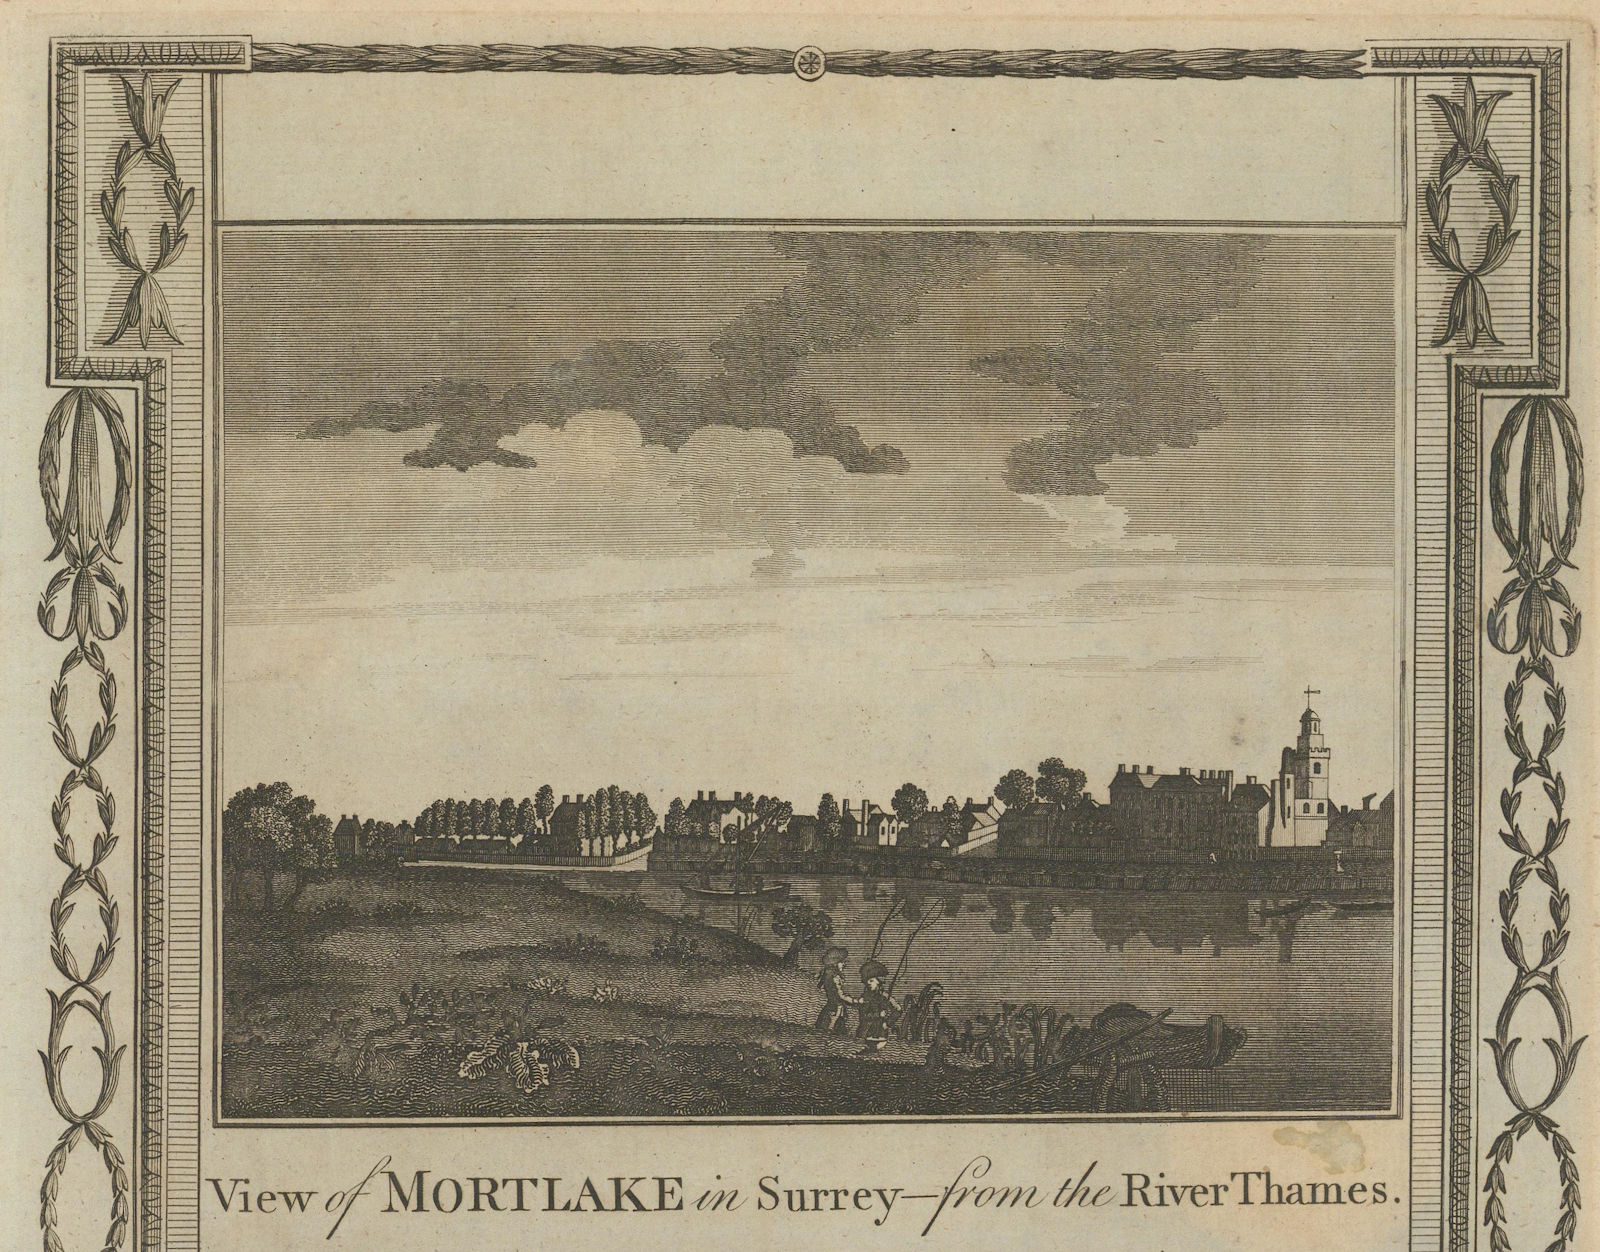 View of Mortlake from Dukes Meadows. St Mary the Virgin church. THORNTON 1784